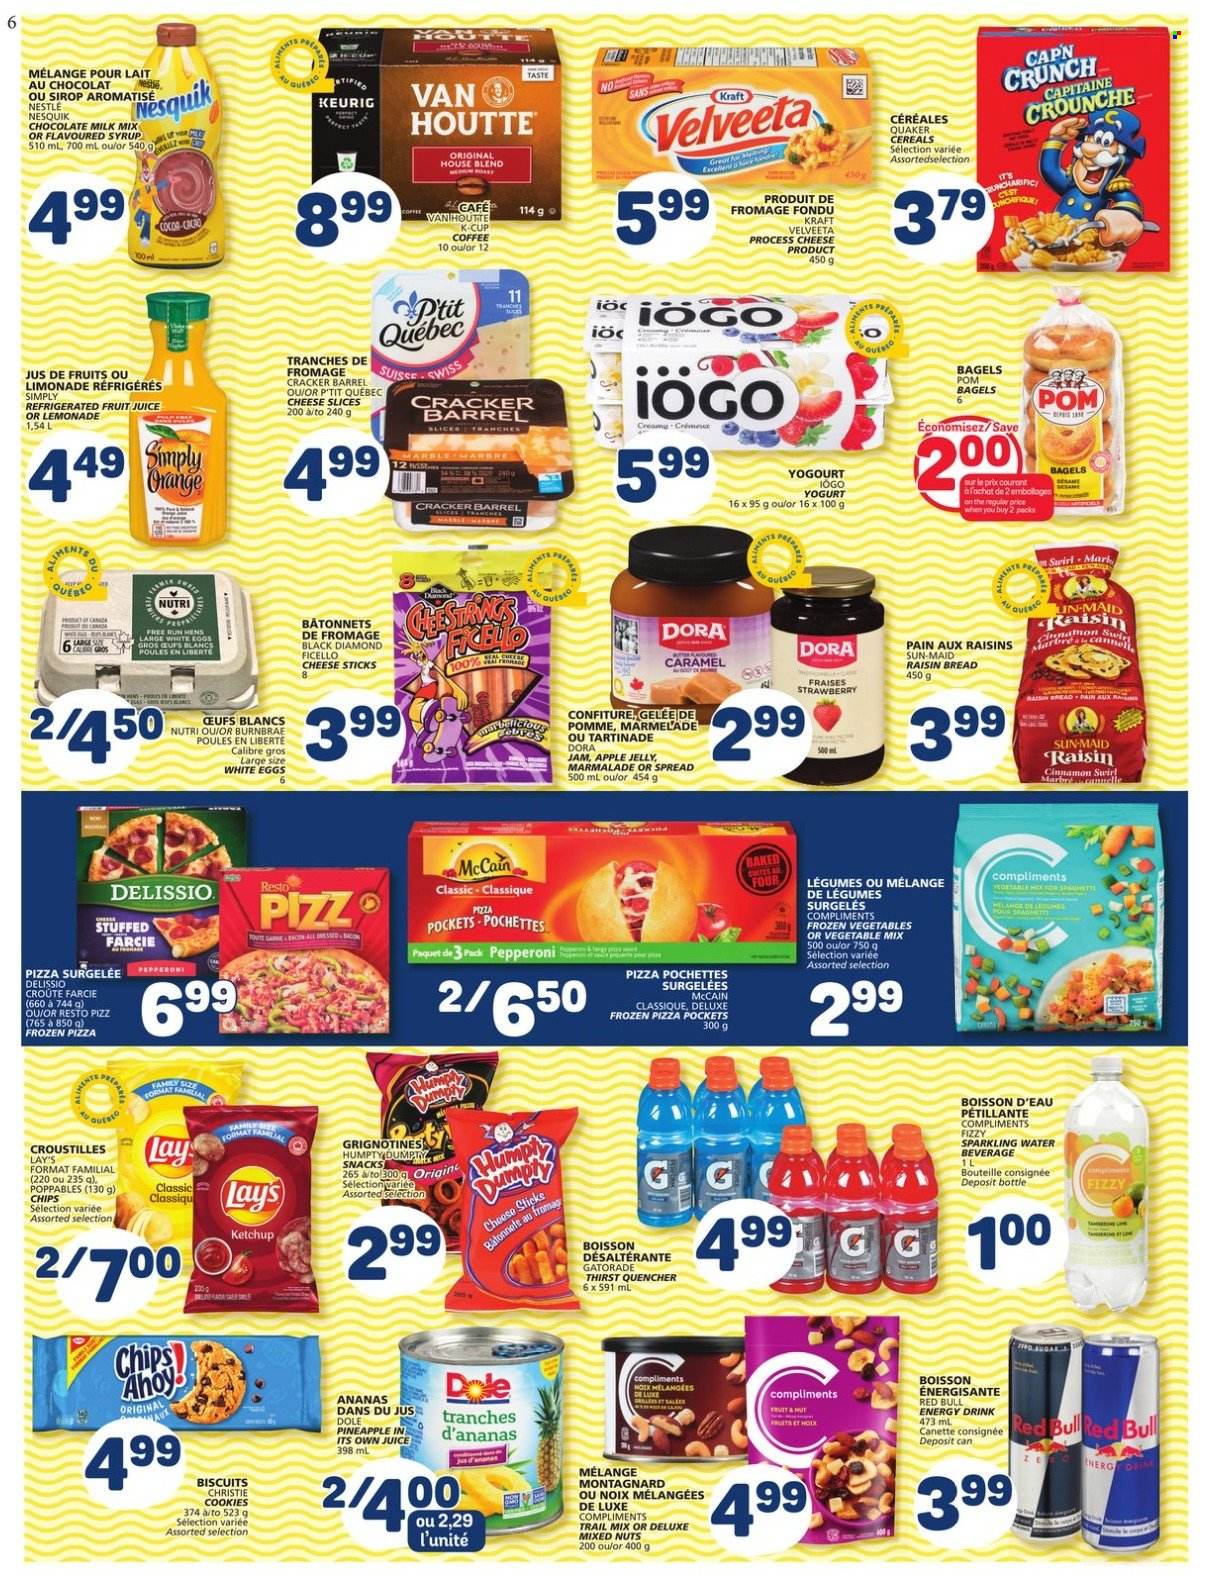 thumbnail - Marché Bonichoix Flyer - October 21, 2021 - October 27, 2021 - Sales products - bagels, bread, Dole, pineapple, pizza, Quaker, Kraft®, pepperoni, sliced cheese, yoghurt, milk, eggs, frozen vegetables, cheese sticks, McCain, cookies, milk chocolate, chocolate, snack, jelly, crackers, biscuit, Lay’s, cereals, caramel, apple jelly, fruit jam, syrup, dried fruit, mixed nuts, trail mix, lemonade, juice, fruit juice, Red Bull, Gatorade, sparkling water, coffee, coffee capsules, K-Cups, Keurig, Nesquik, Nestlé, raisins, ketchup. Page 6.